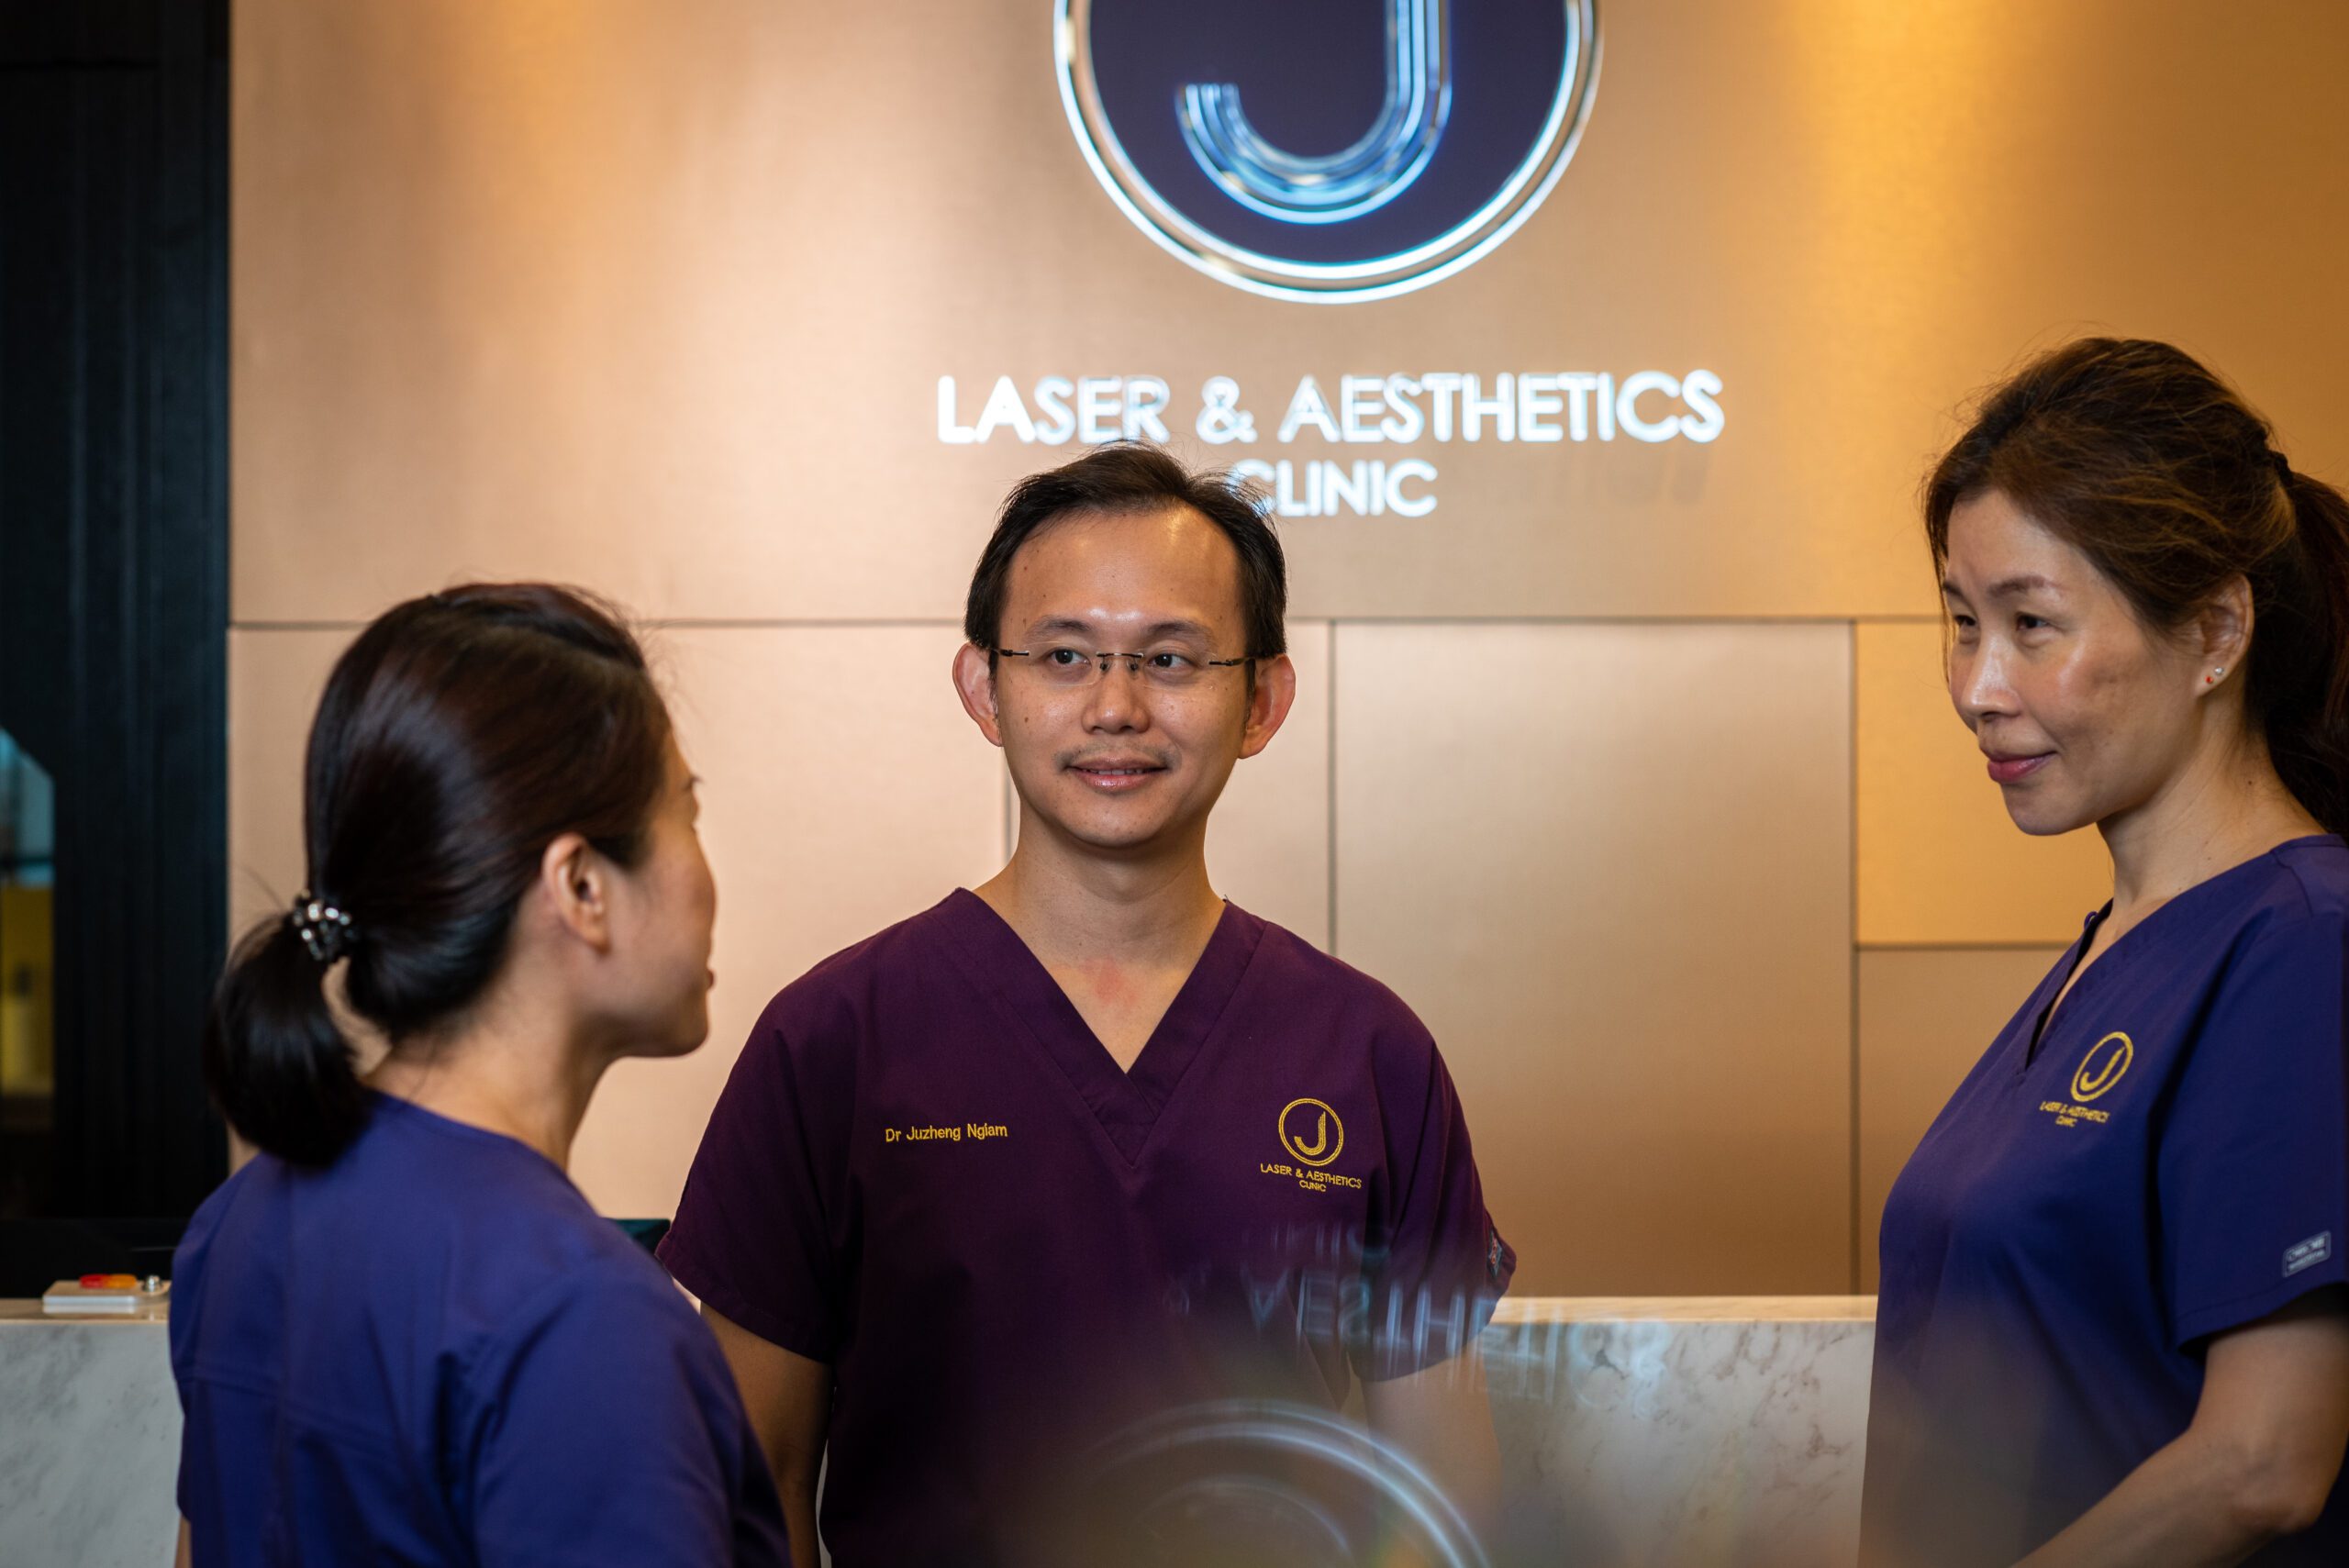 aesthetic doctor ngiam juzheng with 2 team members in clinic uniforms